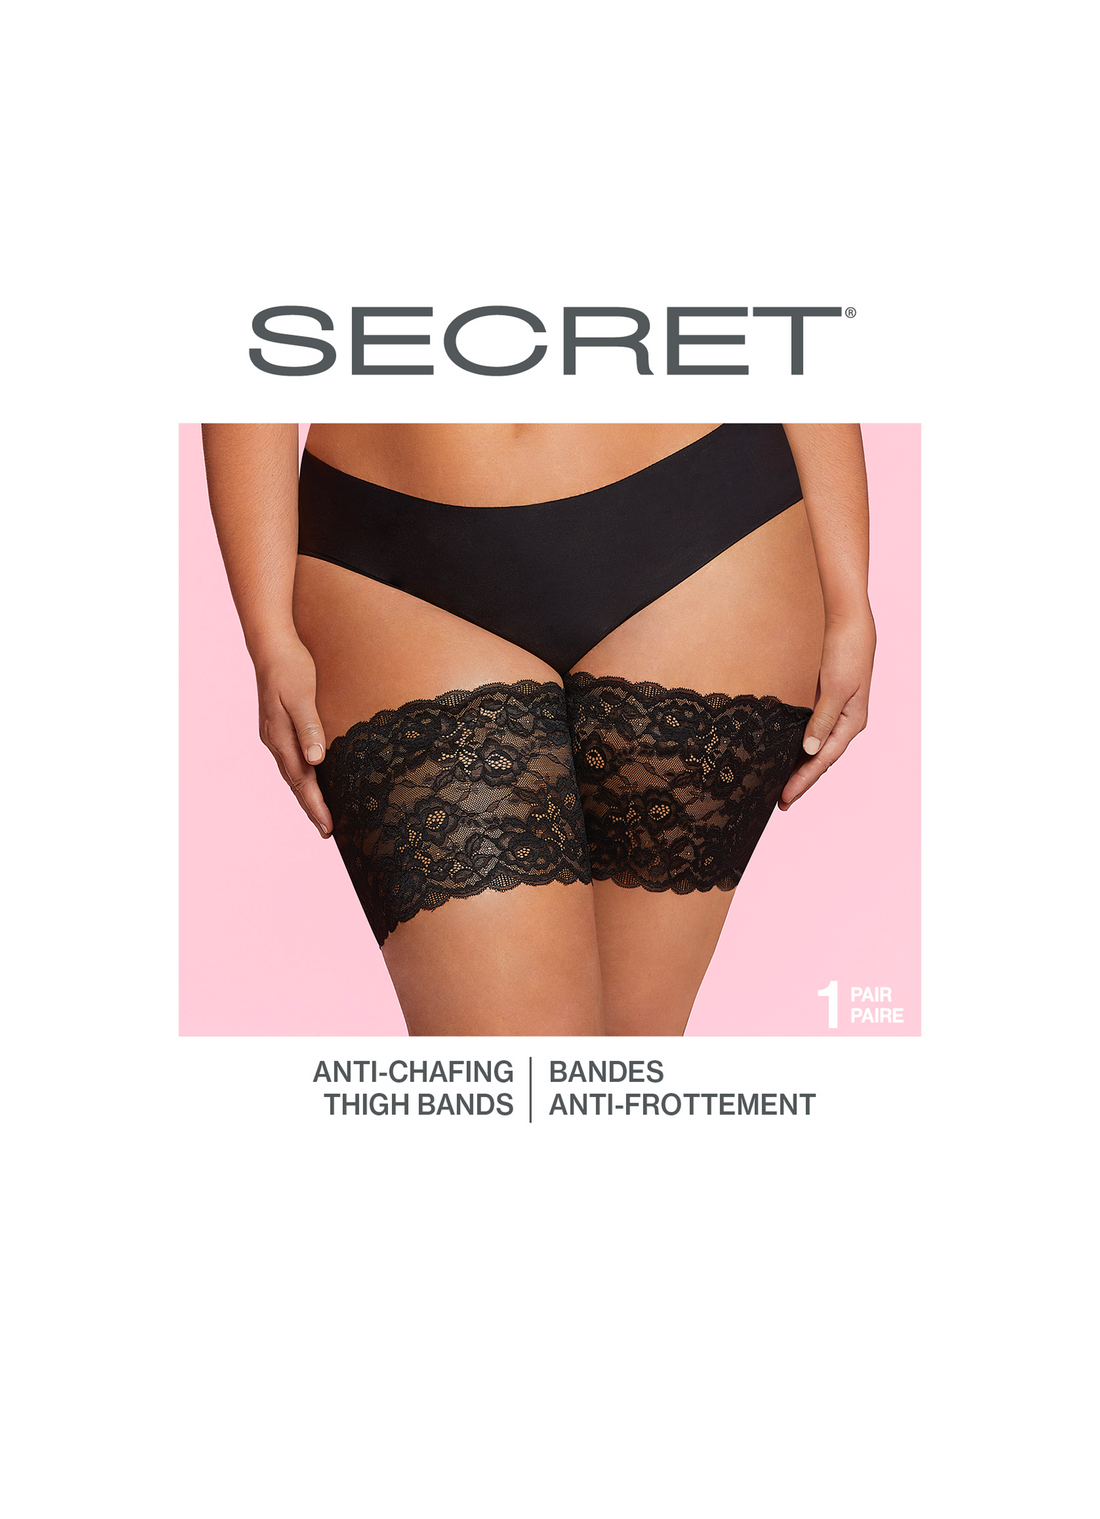 SECRET® Anti-Chafing Lace Thigh Bands - 1 Pair